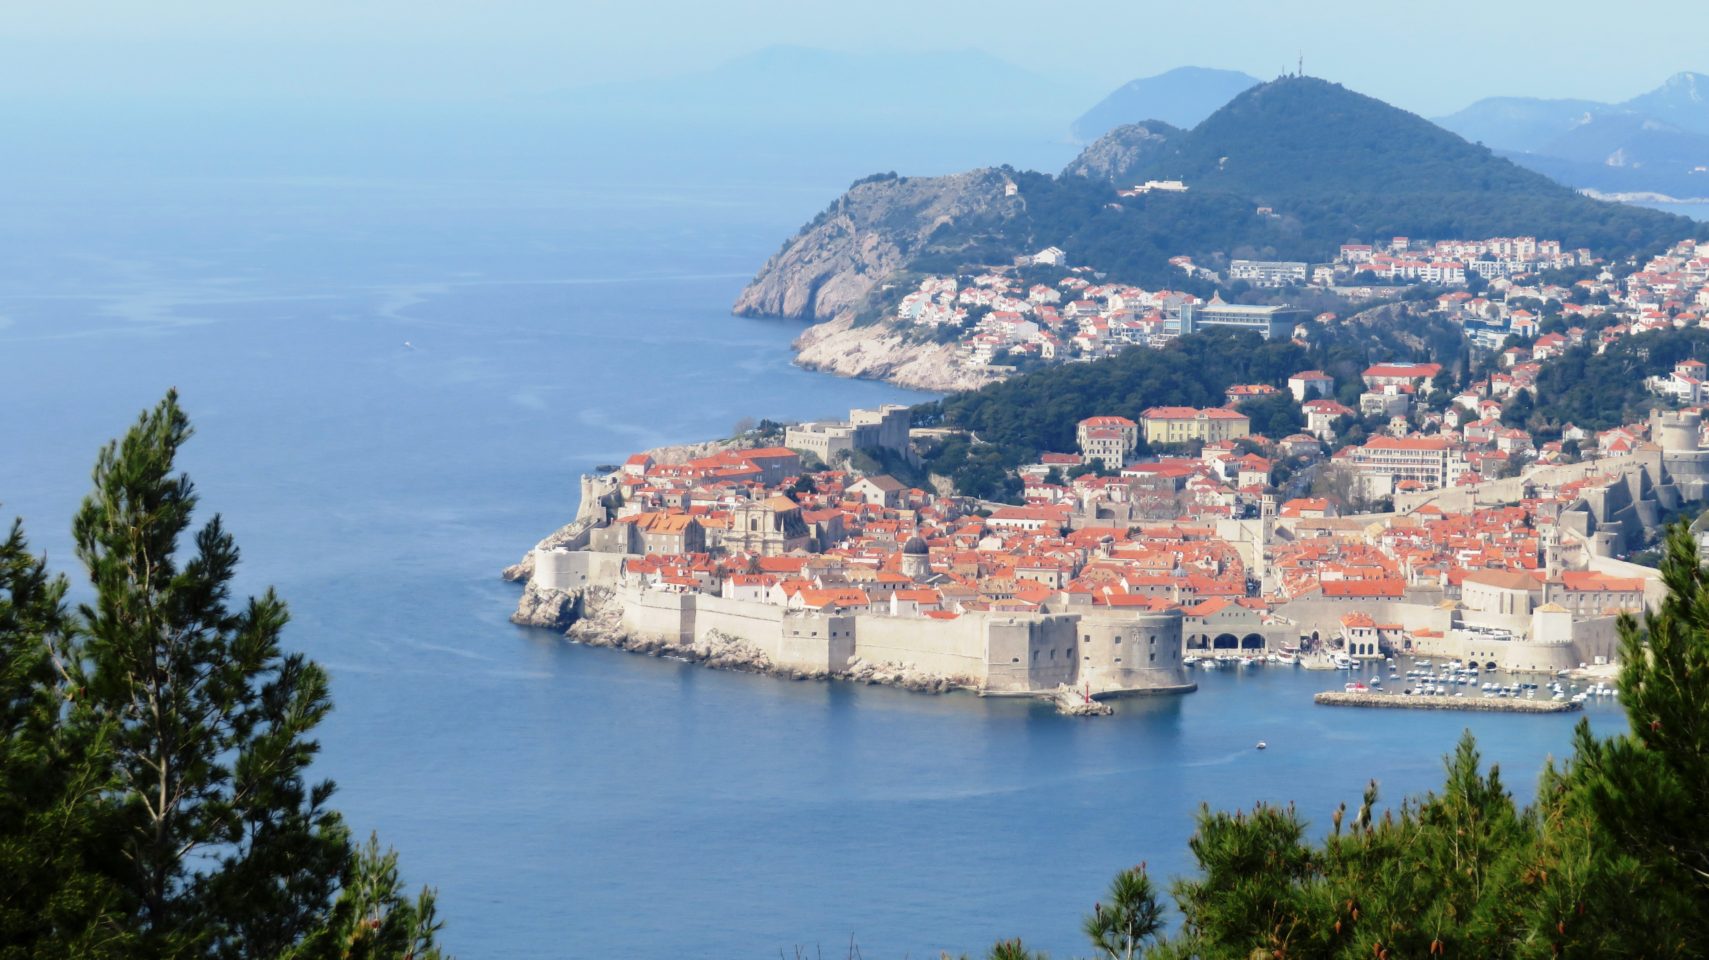 The Art of Travel Preparation ~ Dubrovnik among the Perfect Ports of Call & Excursions on our Mediterranean Cruise with Viking Ocean Cruises